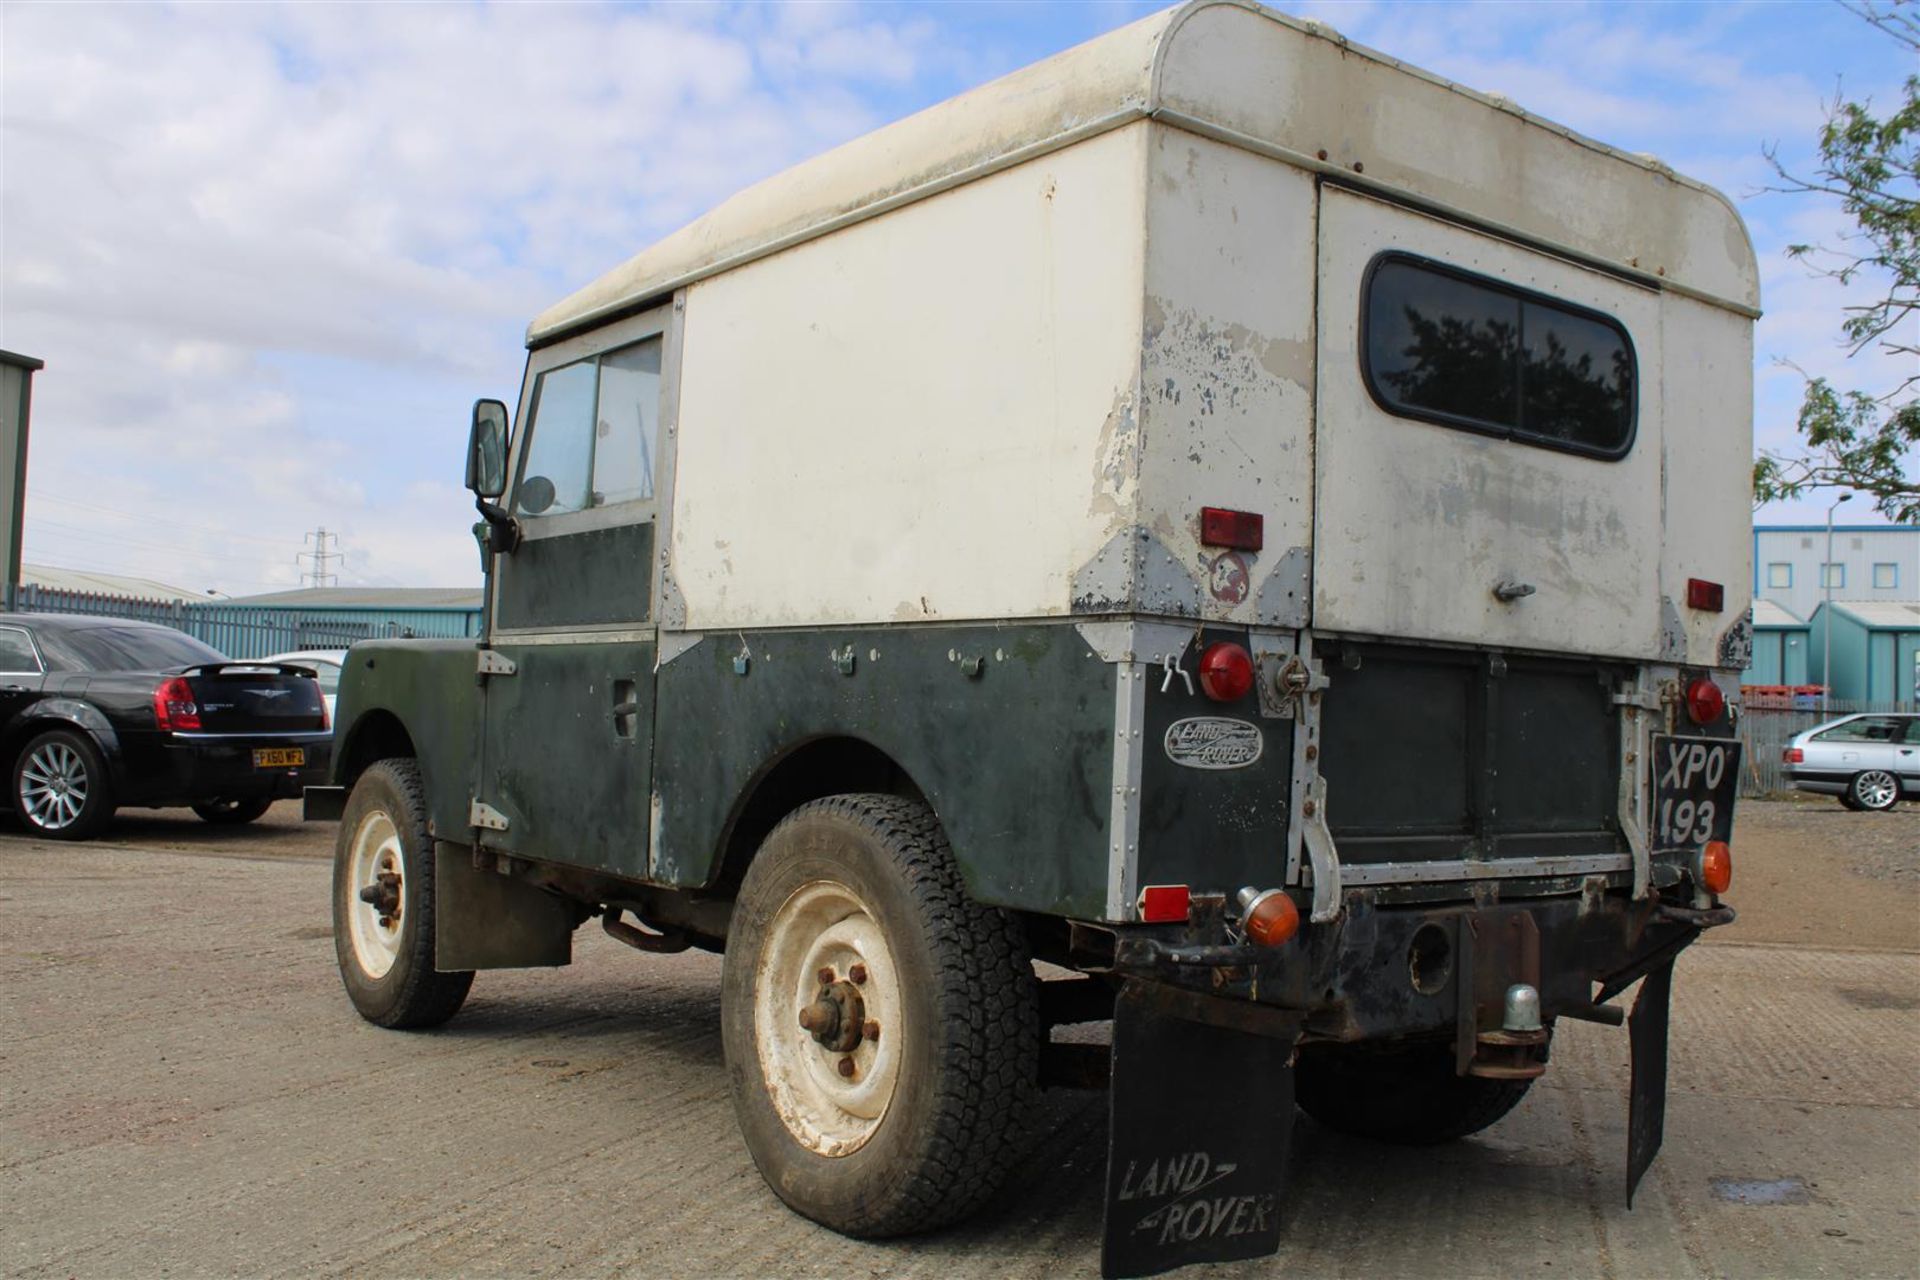 1957 Land Rover 88 Series I" - Image 17 of 26